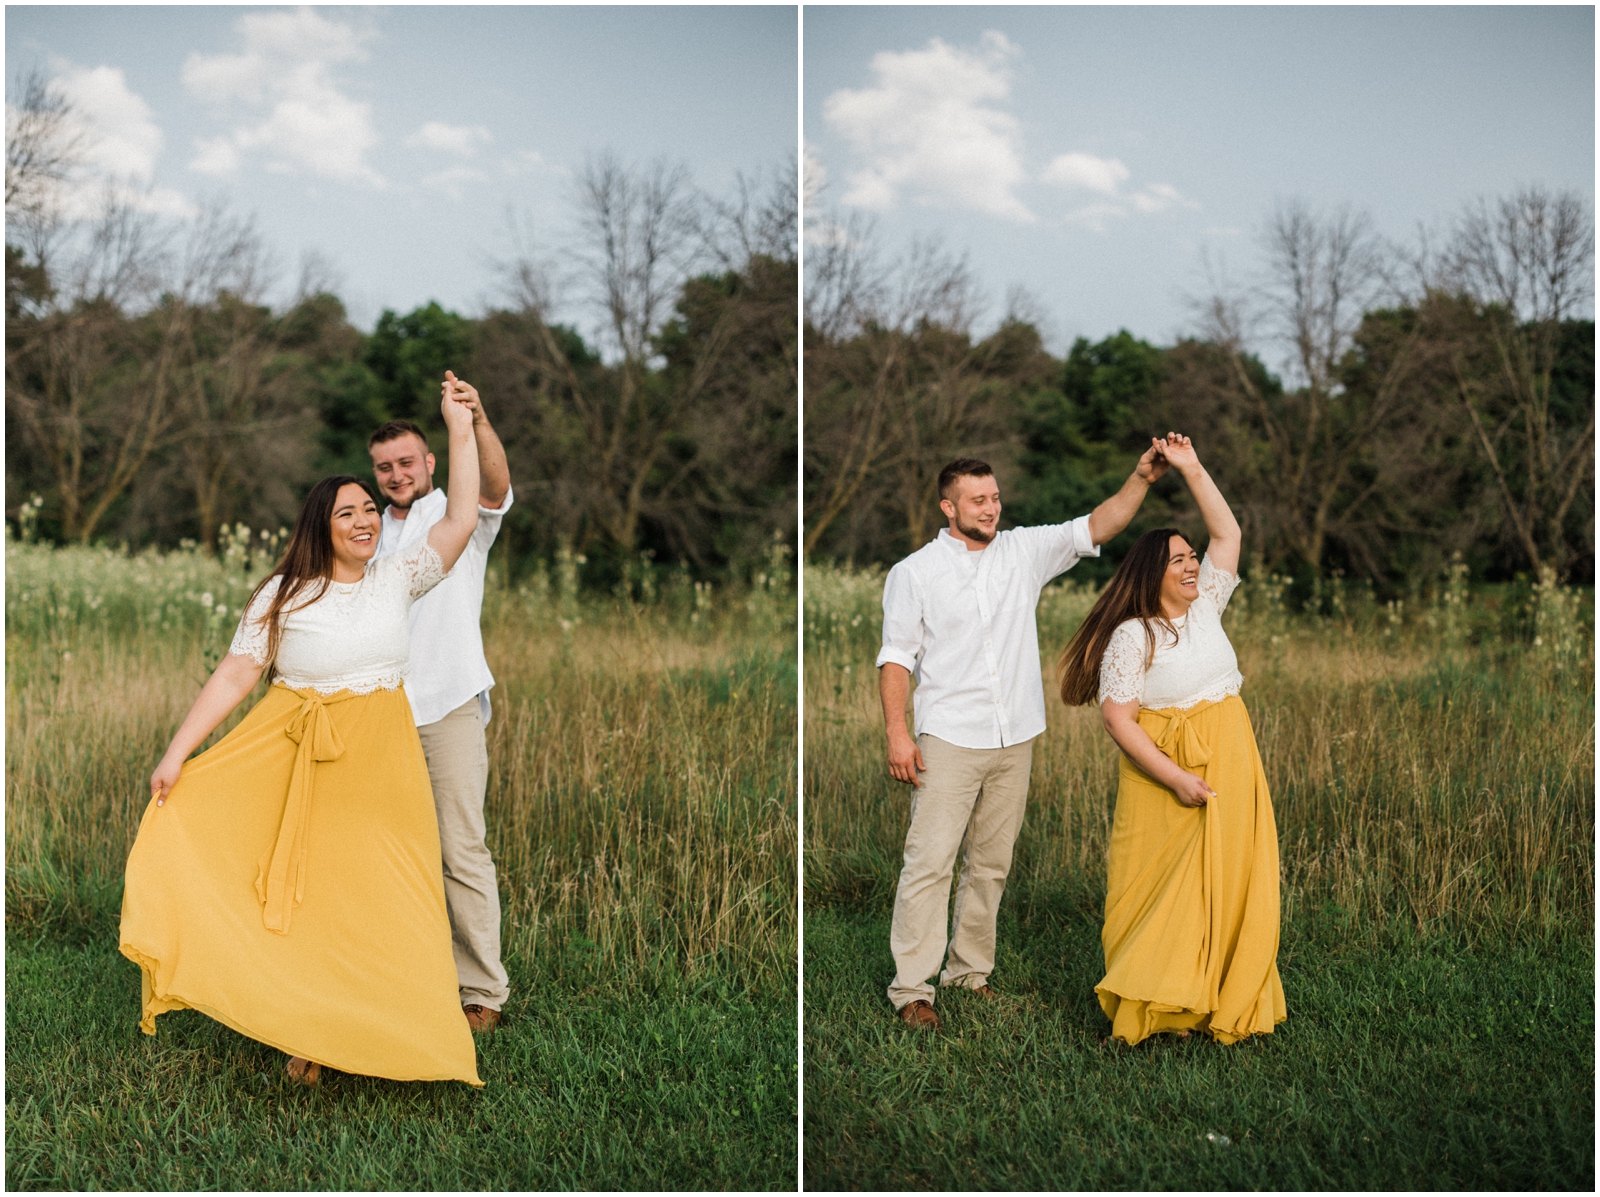  couple dancing Rolling Meadows Ranch in Lebanon, OH   